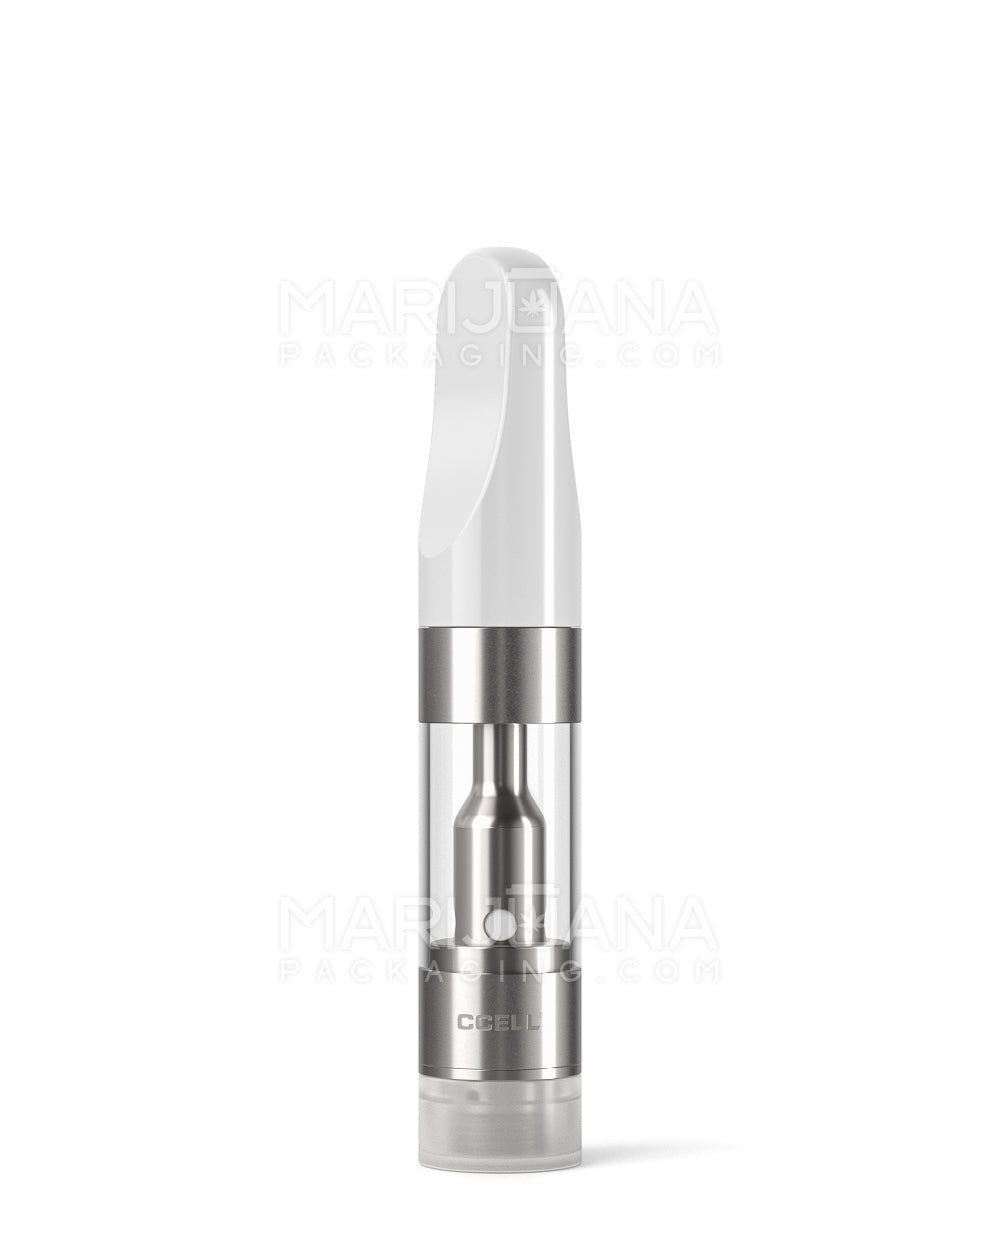 CCELL | Plastic Vape Cartridge with White Plastic Mouthpiece | 0.5mL - Press On - 100 Count - 3